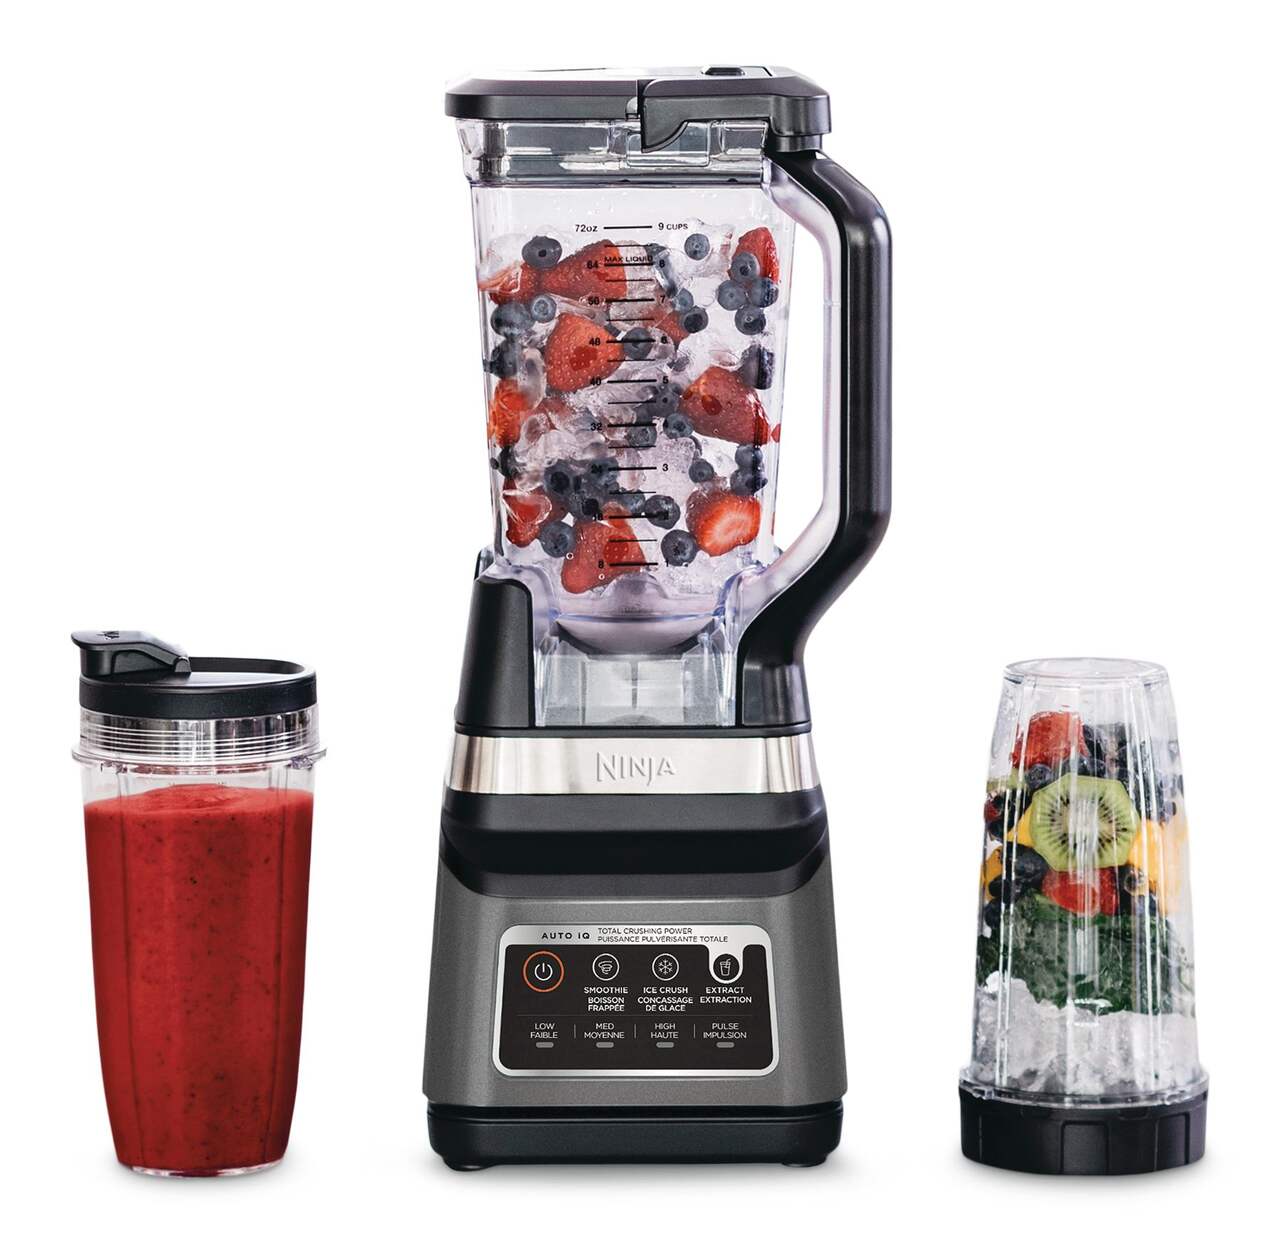 https://media-www.canadiantire.ca/product/living/kitchen/kitchen-appliances/0430730/ninja-professional-plus-blender-duo-with-auto-iq-370ace8c-7ce2-4ee8-ab13-fa3ebe23cb4b-jpgrendition.jpg?imdensity=1&imwidth=1244&impolicy=mZoom